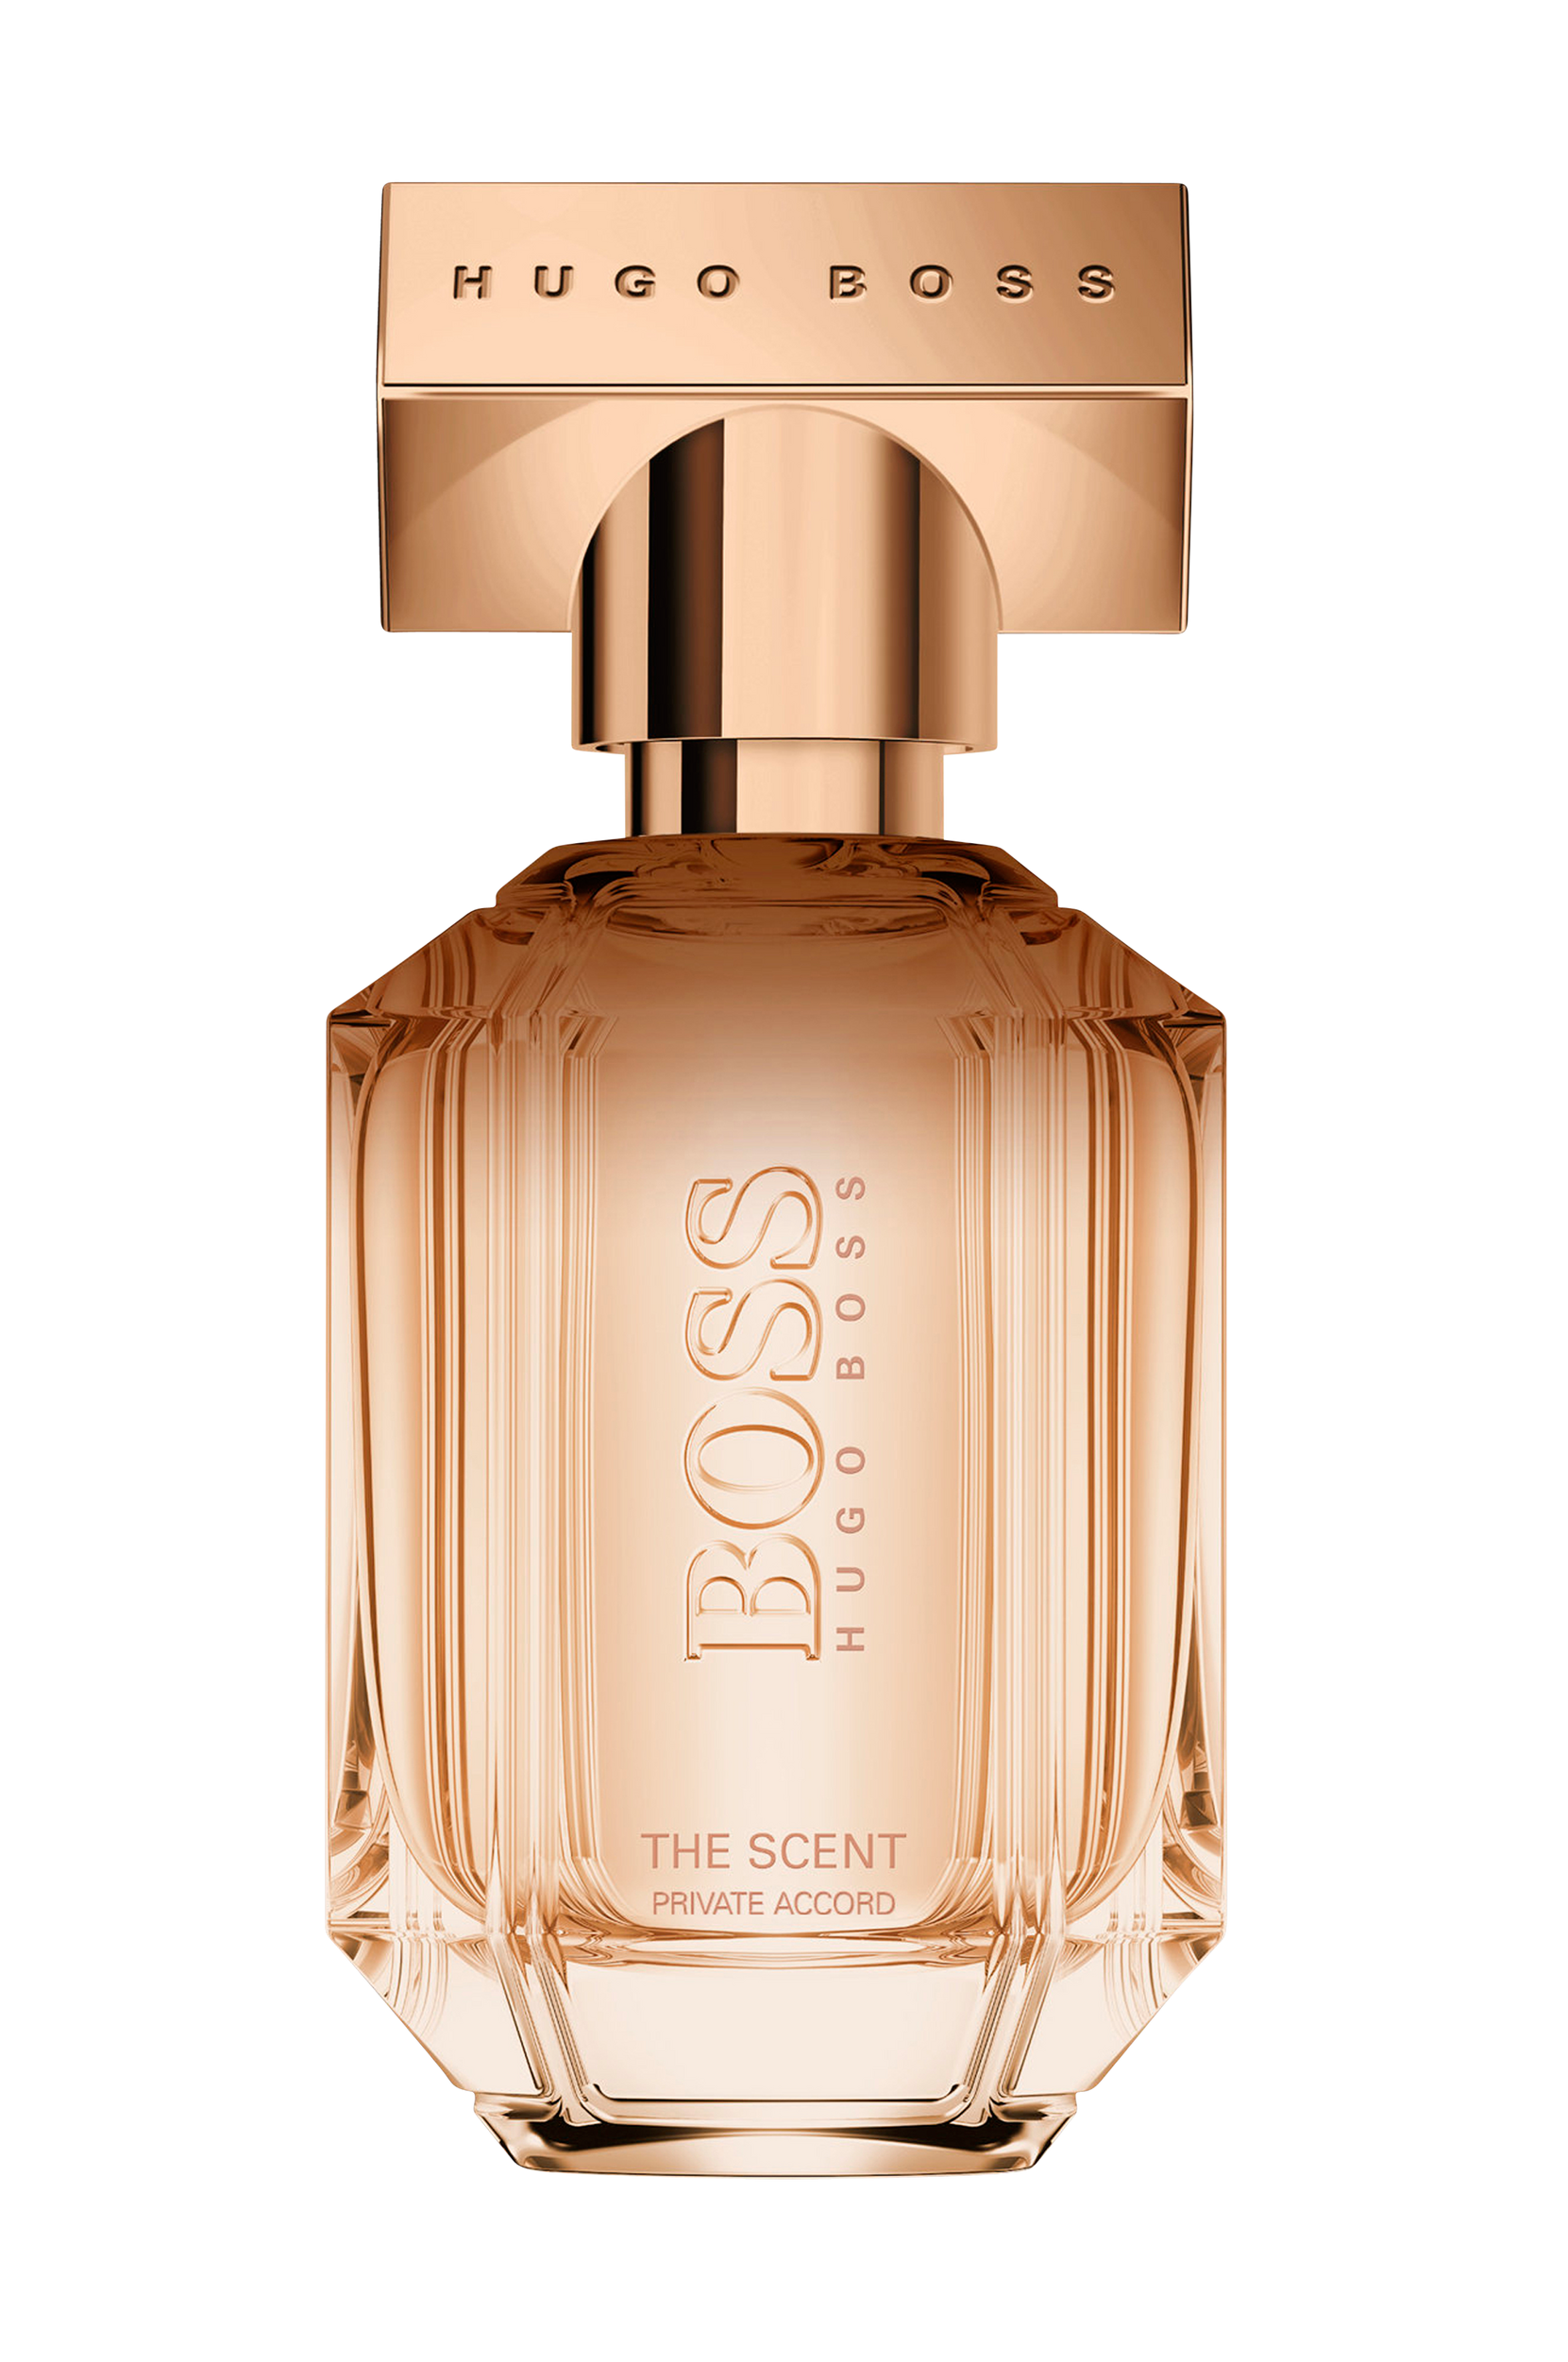 The Scent For Her Private Accord EdP 30 ml, Hugo Boss